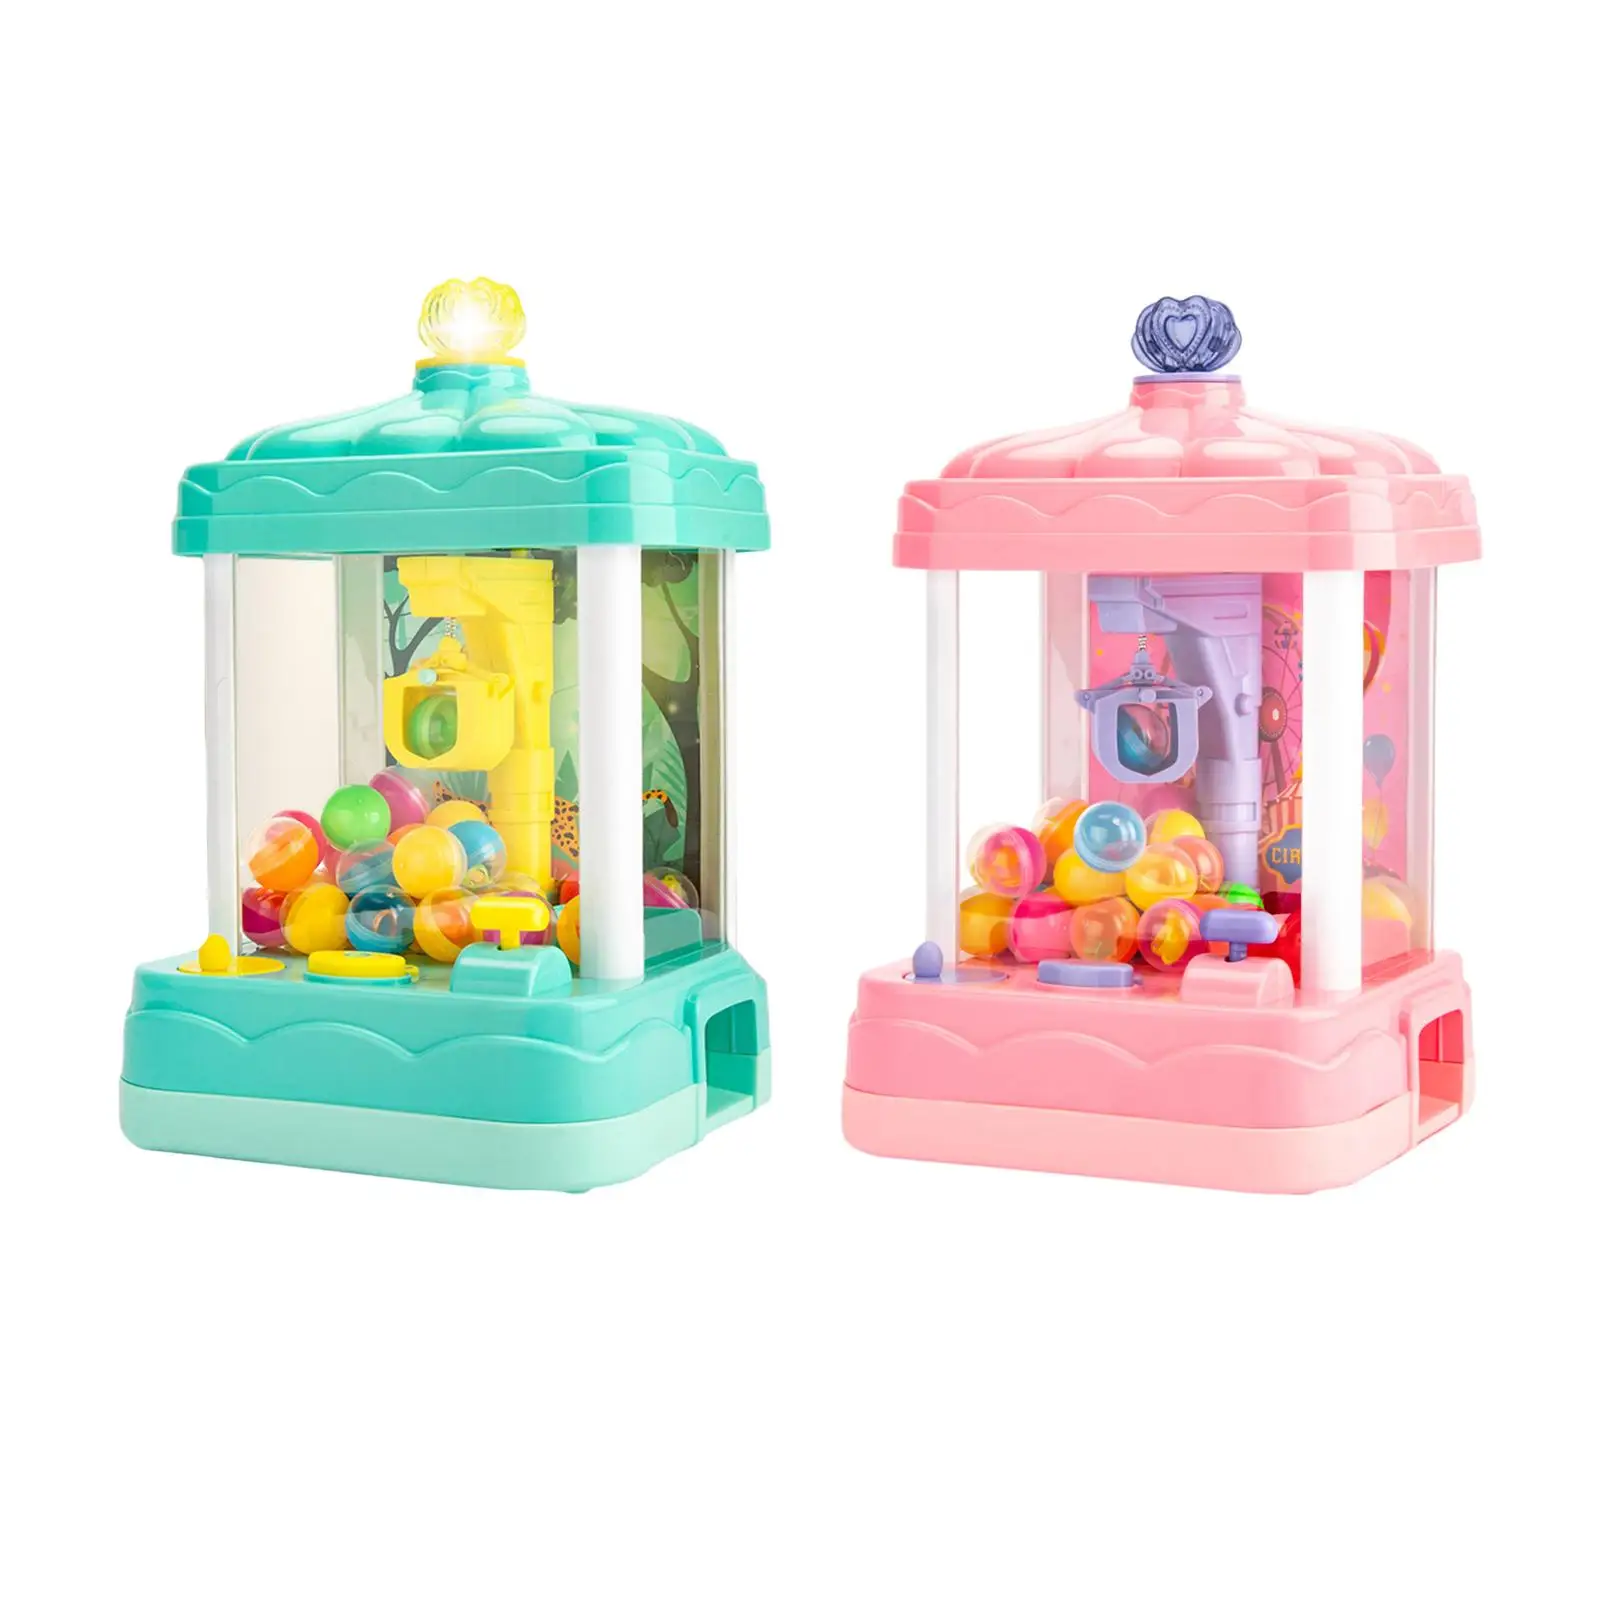 Mini Claw Machine with Music and Lighting Intelligent System DIY Coin Operated Play Game Doll Machine Crane Machines for Kids